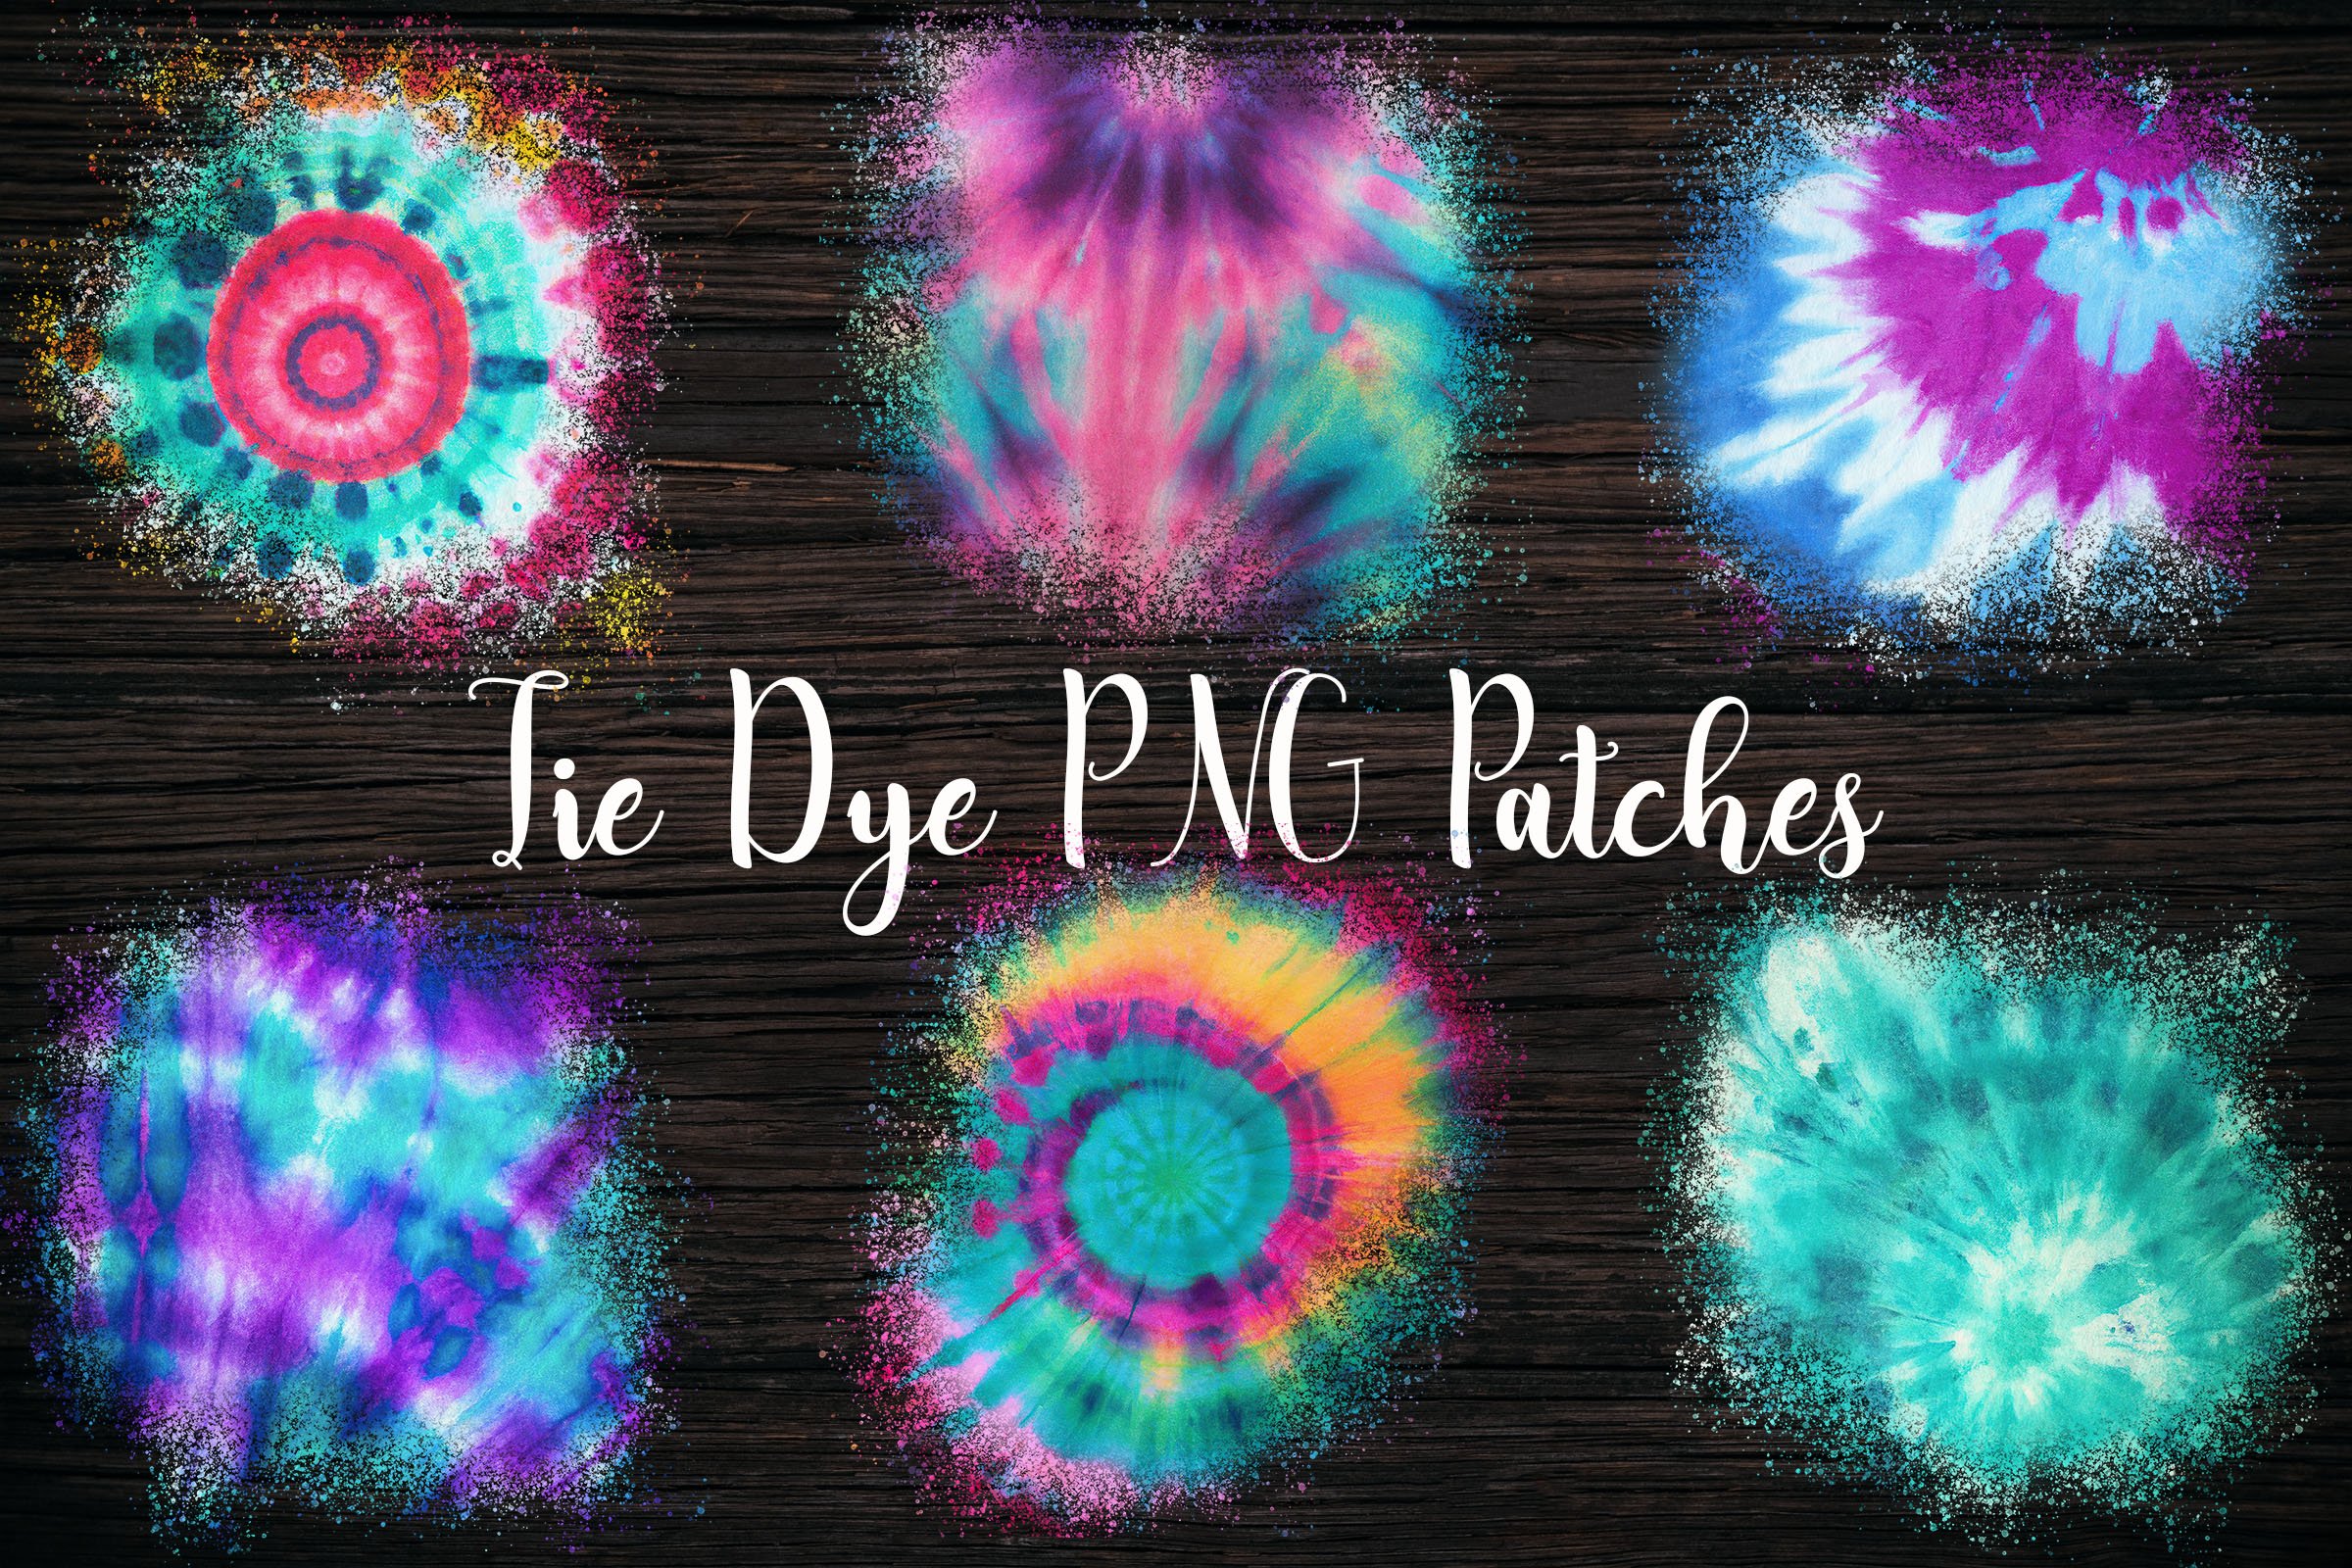 Tie dye rainbow patches cover image.